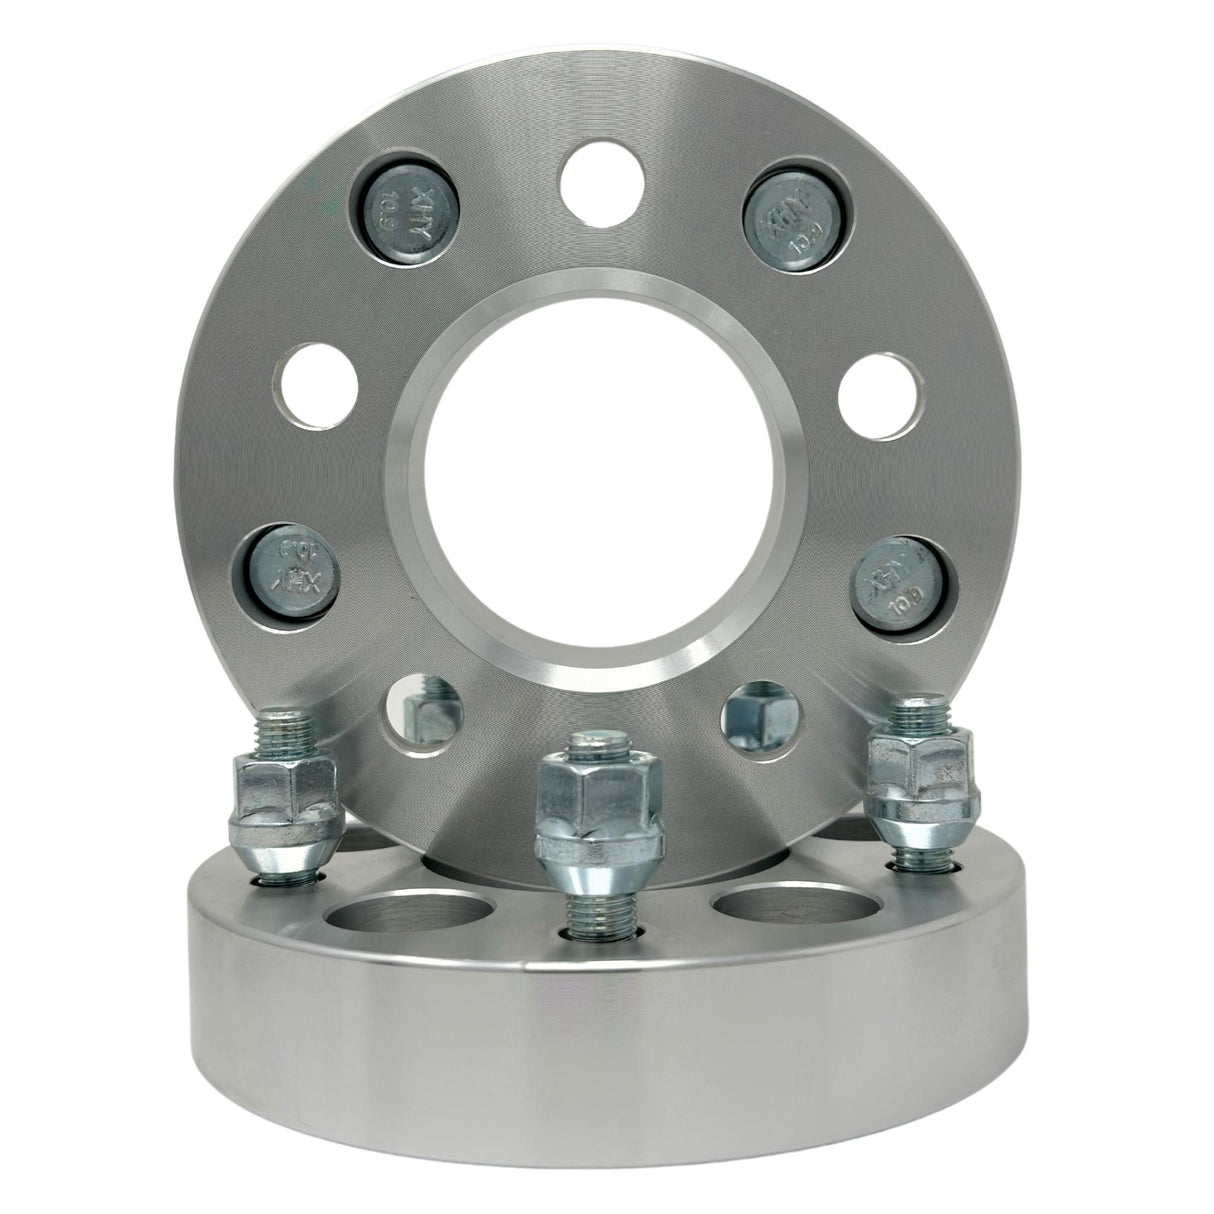 5x100 Wheel Spacers 1" Inch & 1.25" Inch (25-32mm) 12x1.5 Studs & Lug Nuts 56mm Center Bore